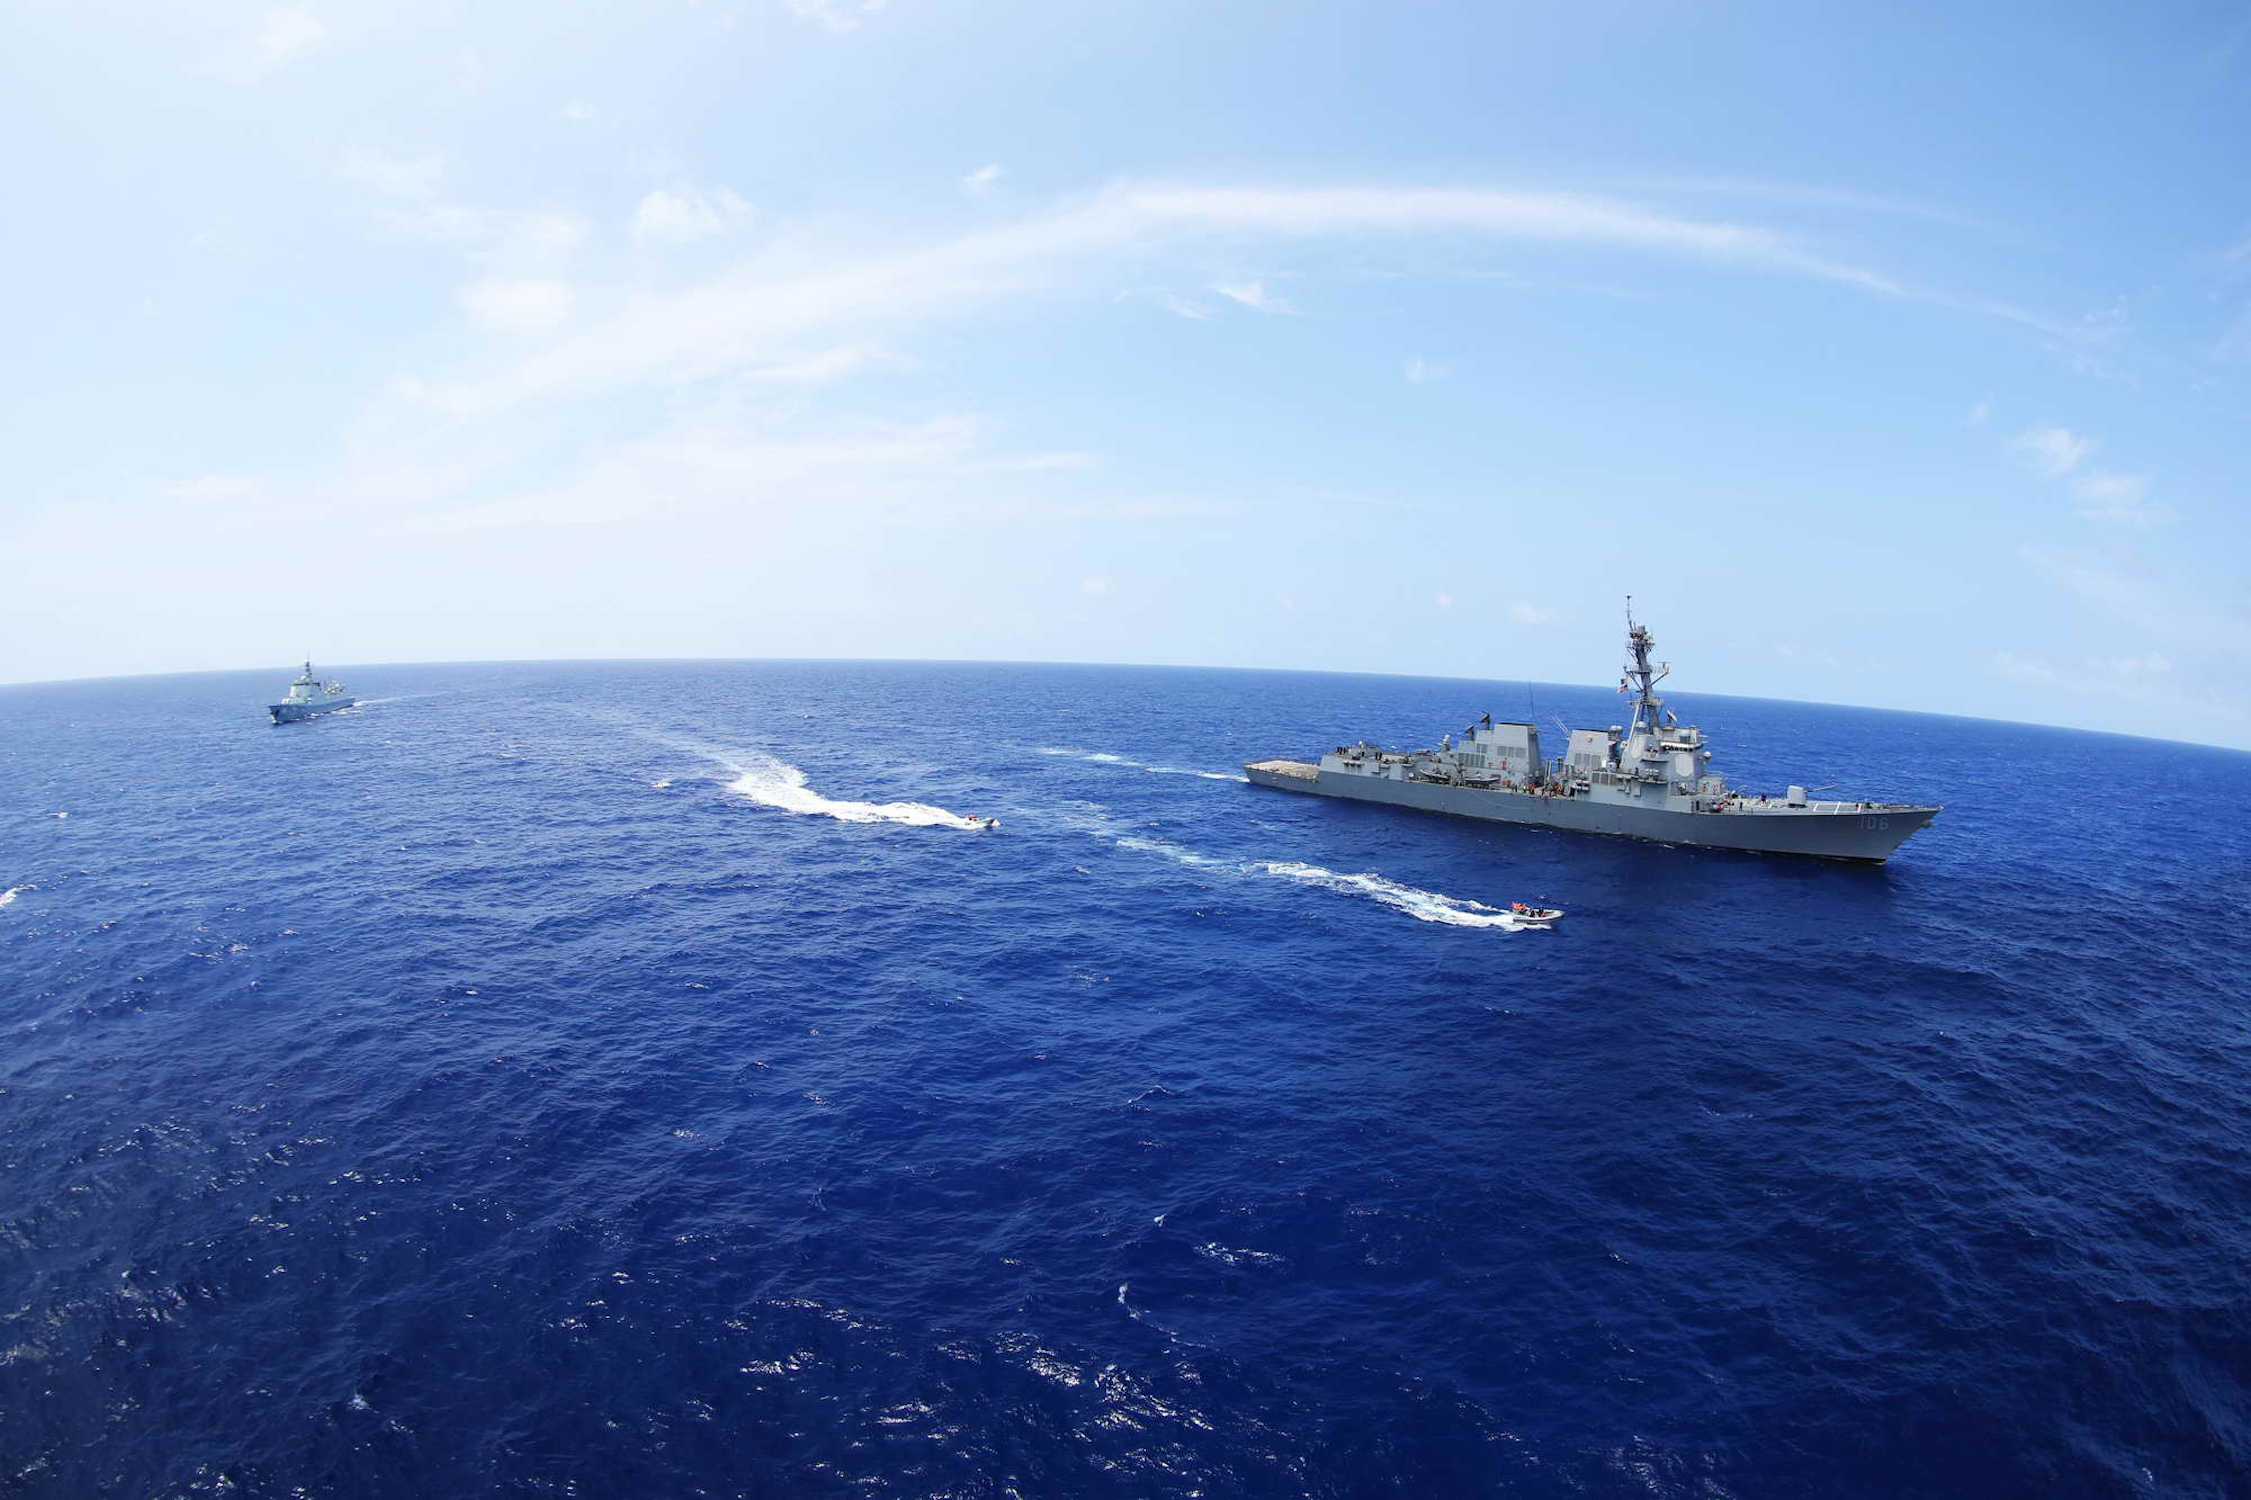 The Chinese Navy guided-missile destroyer Xi’an (153) participates in a maritime interdiction event with the guided missile destroyer USS Stockdale (DDG 106), during Rim of the Pacific (RIMPAC) 2016.